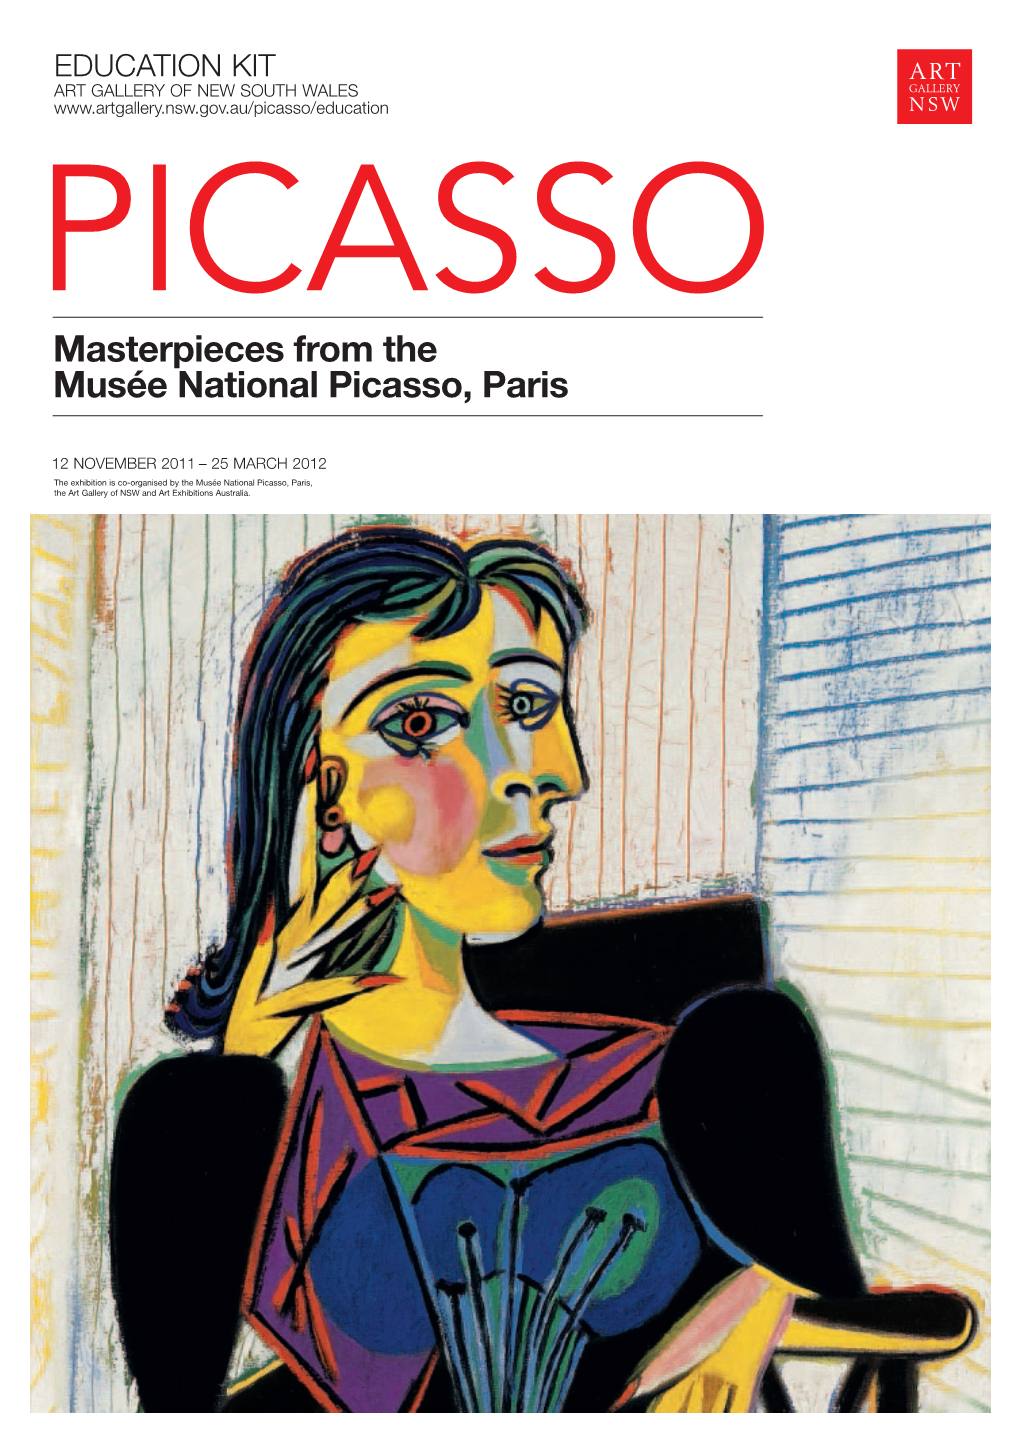 Masterpieces from the Musée National Picasso, Paris